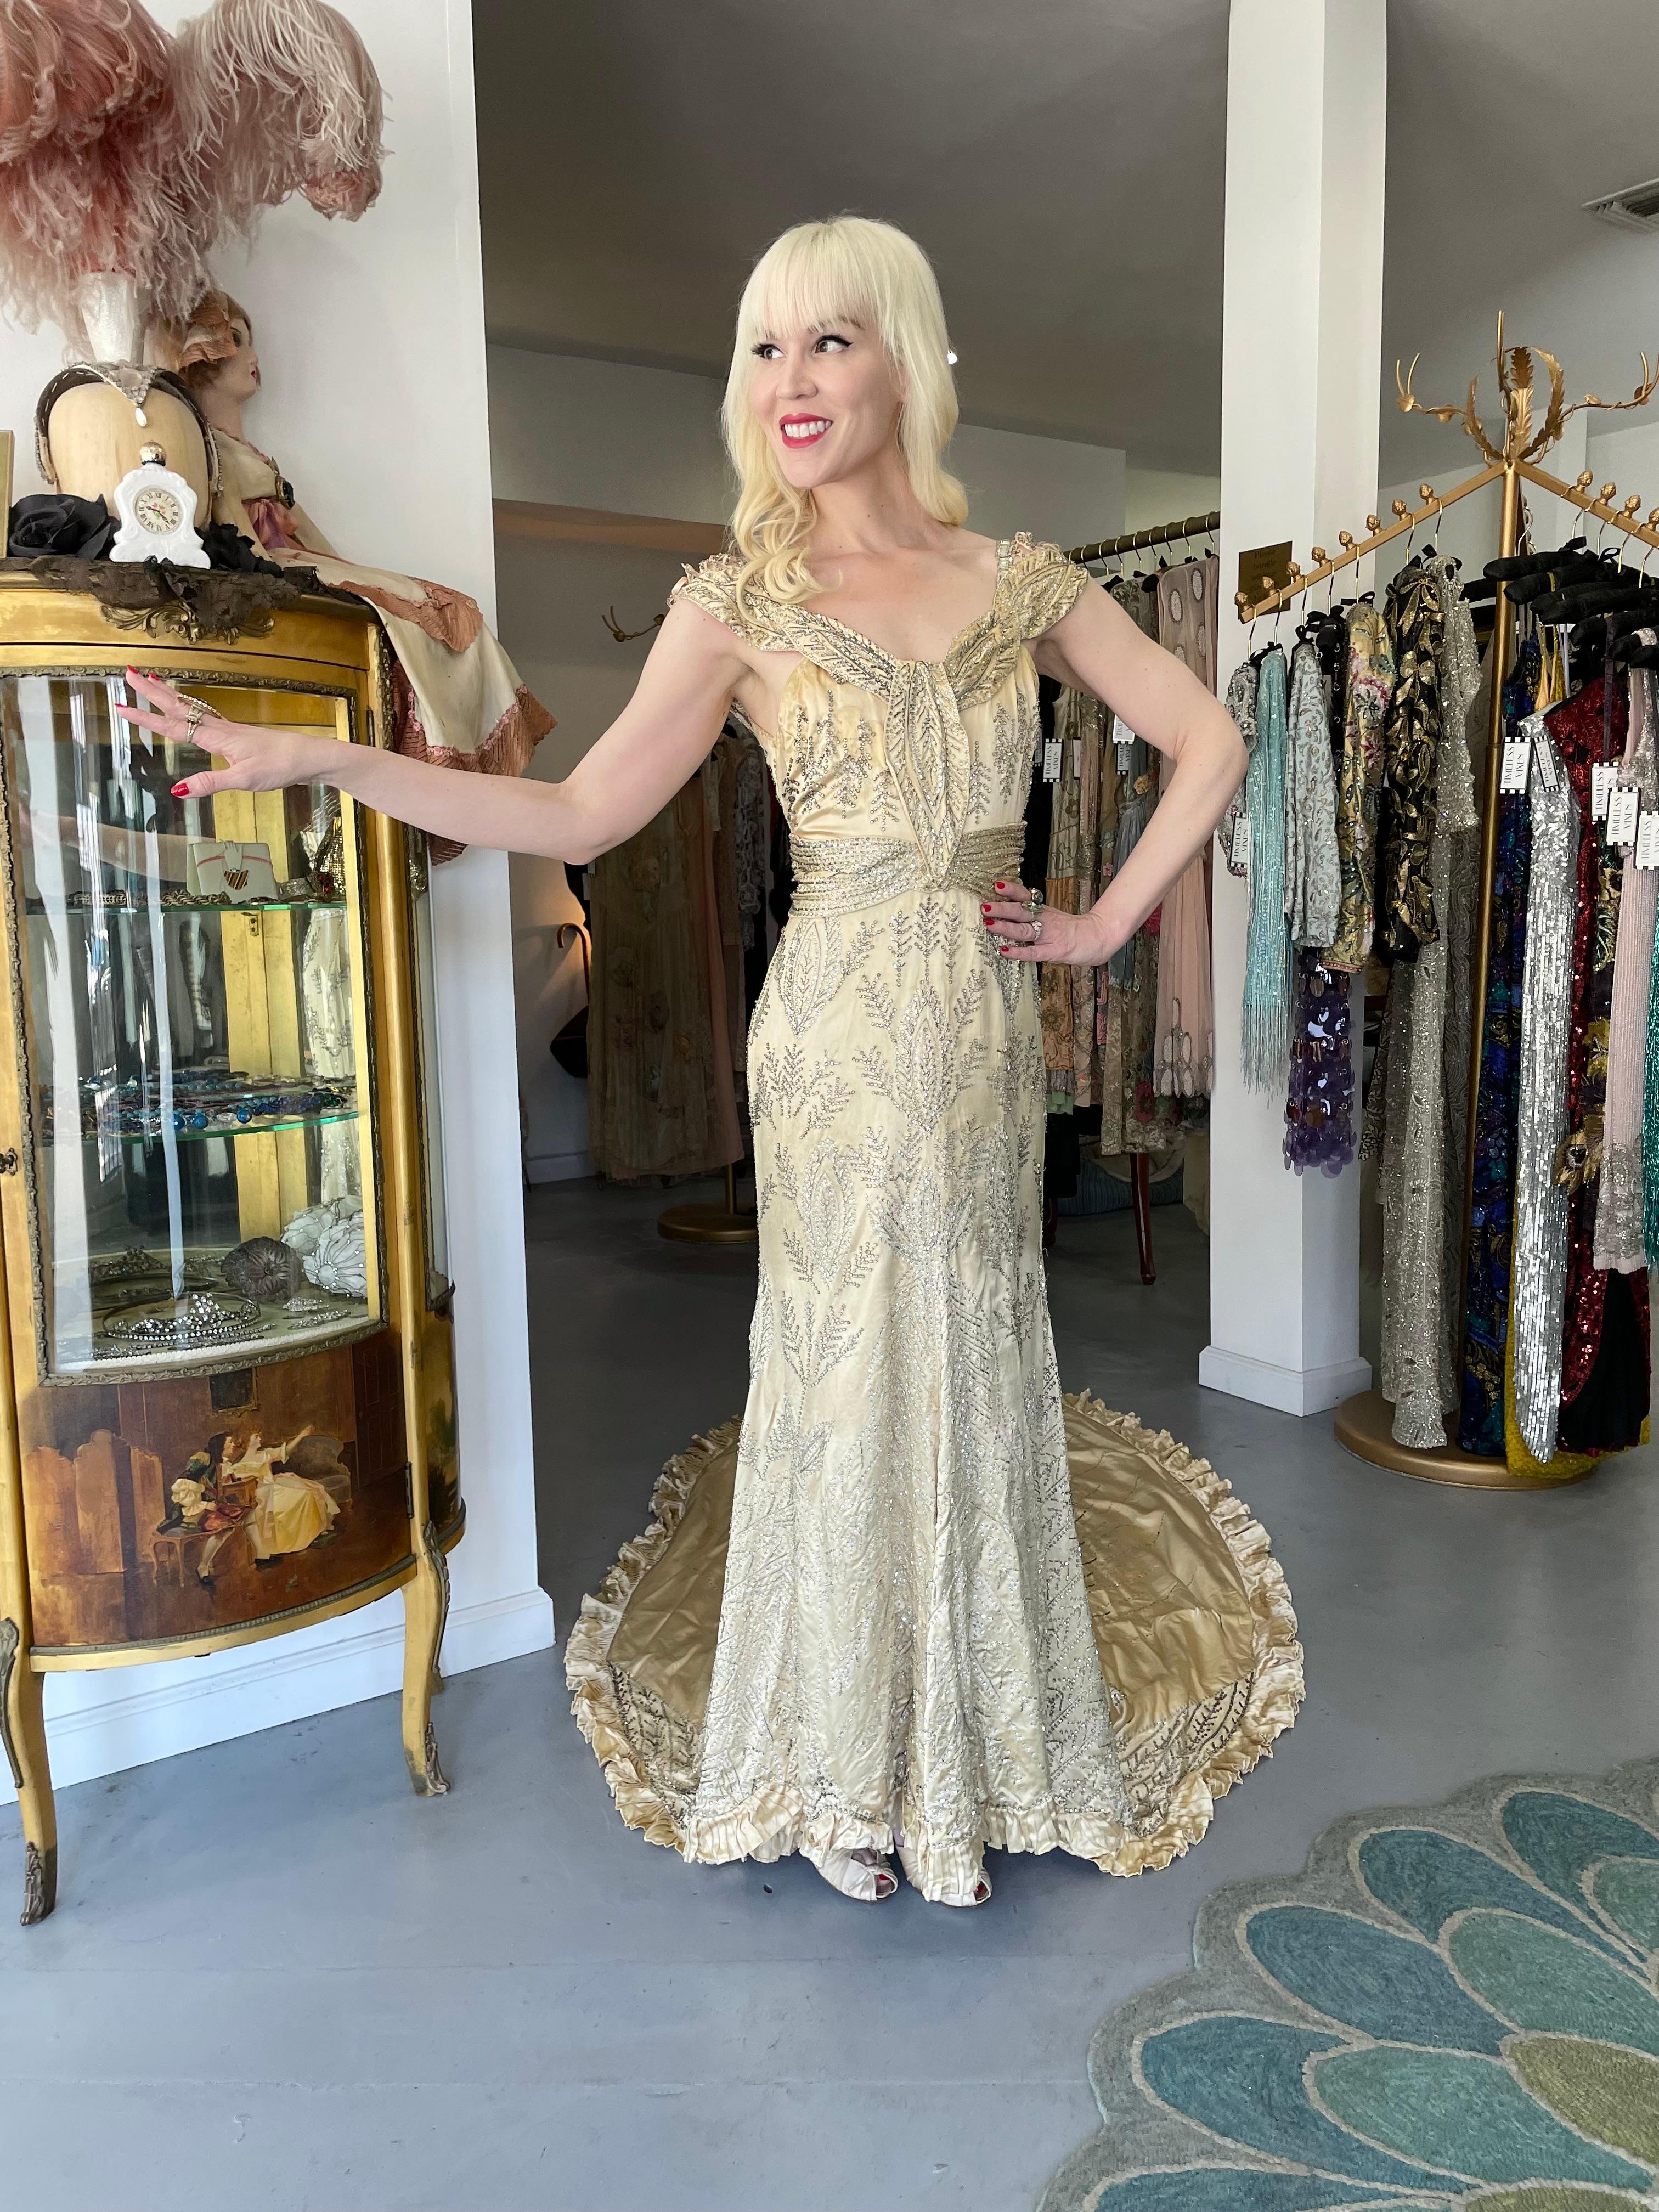 An absolutely breathtaking and incredibly rare candlelight liquid silk satin trained custom couture gown dating back to the 1930's Old Hollywood era of glamour. So Jean Harlow! The fabric itself is a masterpiece; luxurious silk satin with hundreds